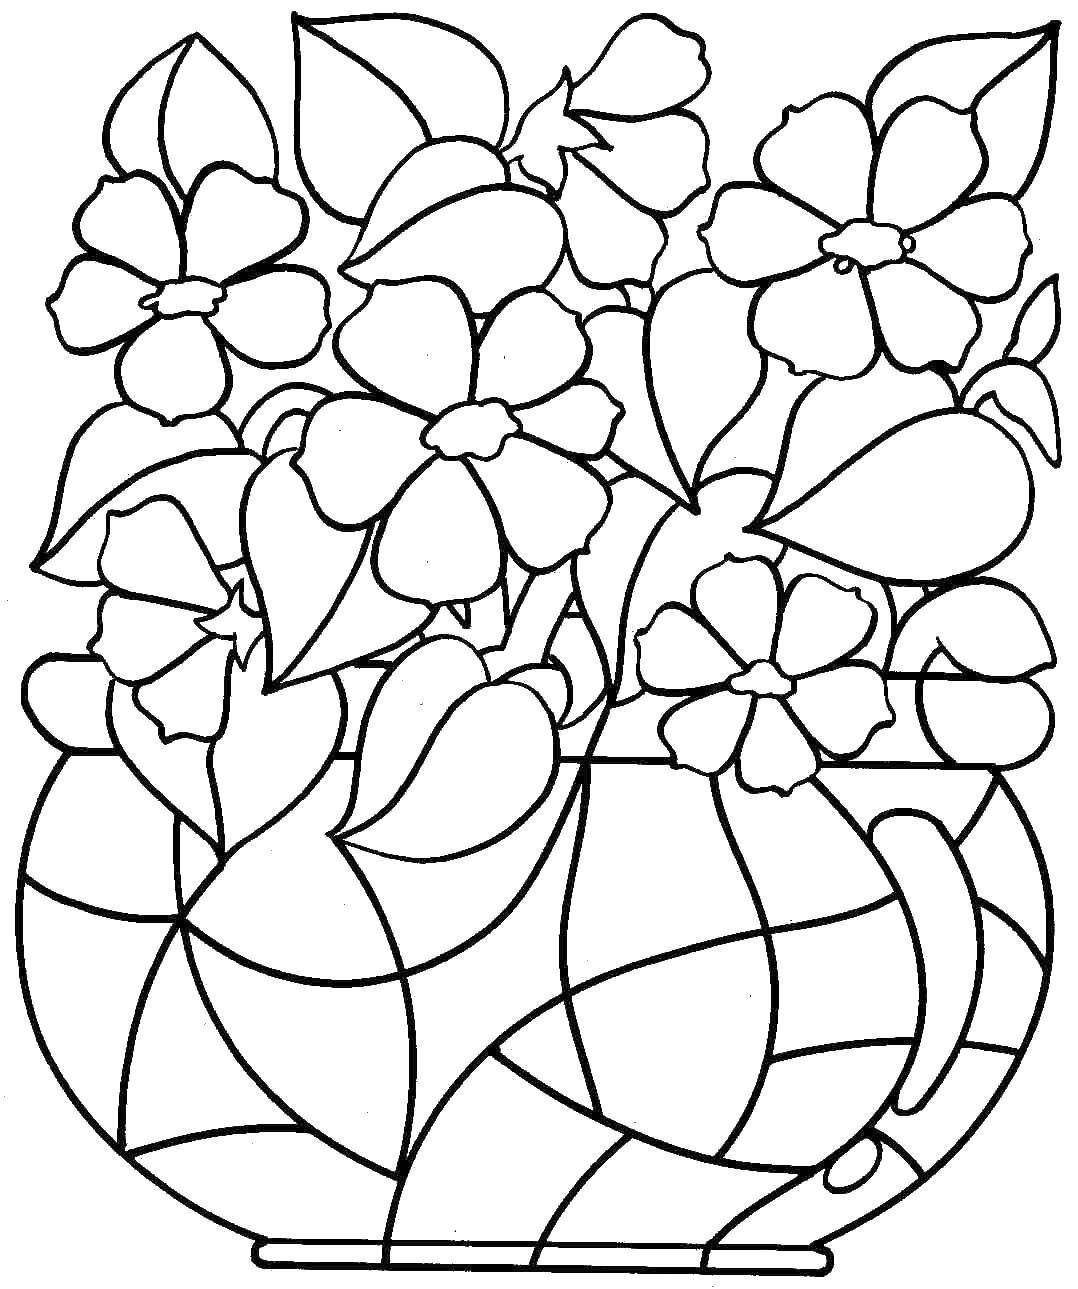 Coloring Flowers in beautiful vases. Category flowers. Tags:  Flowers, bouquet, vase.